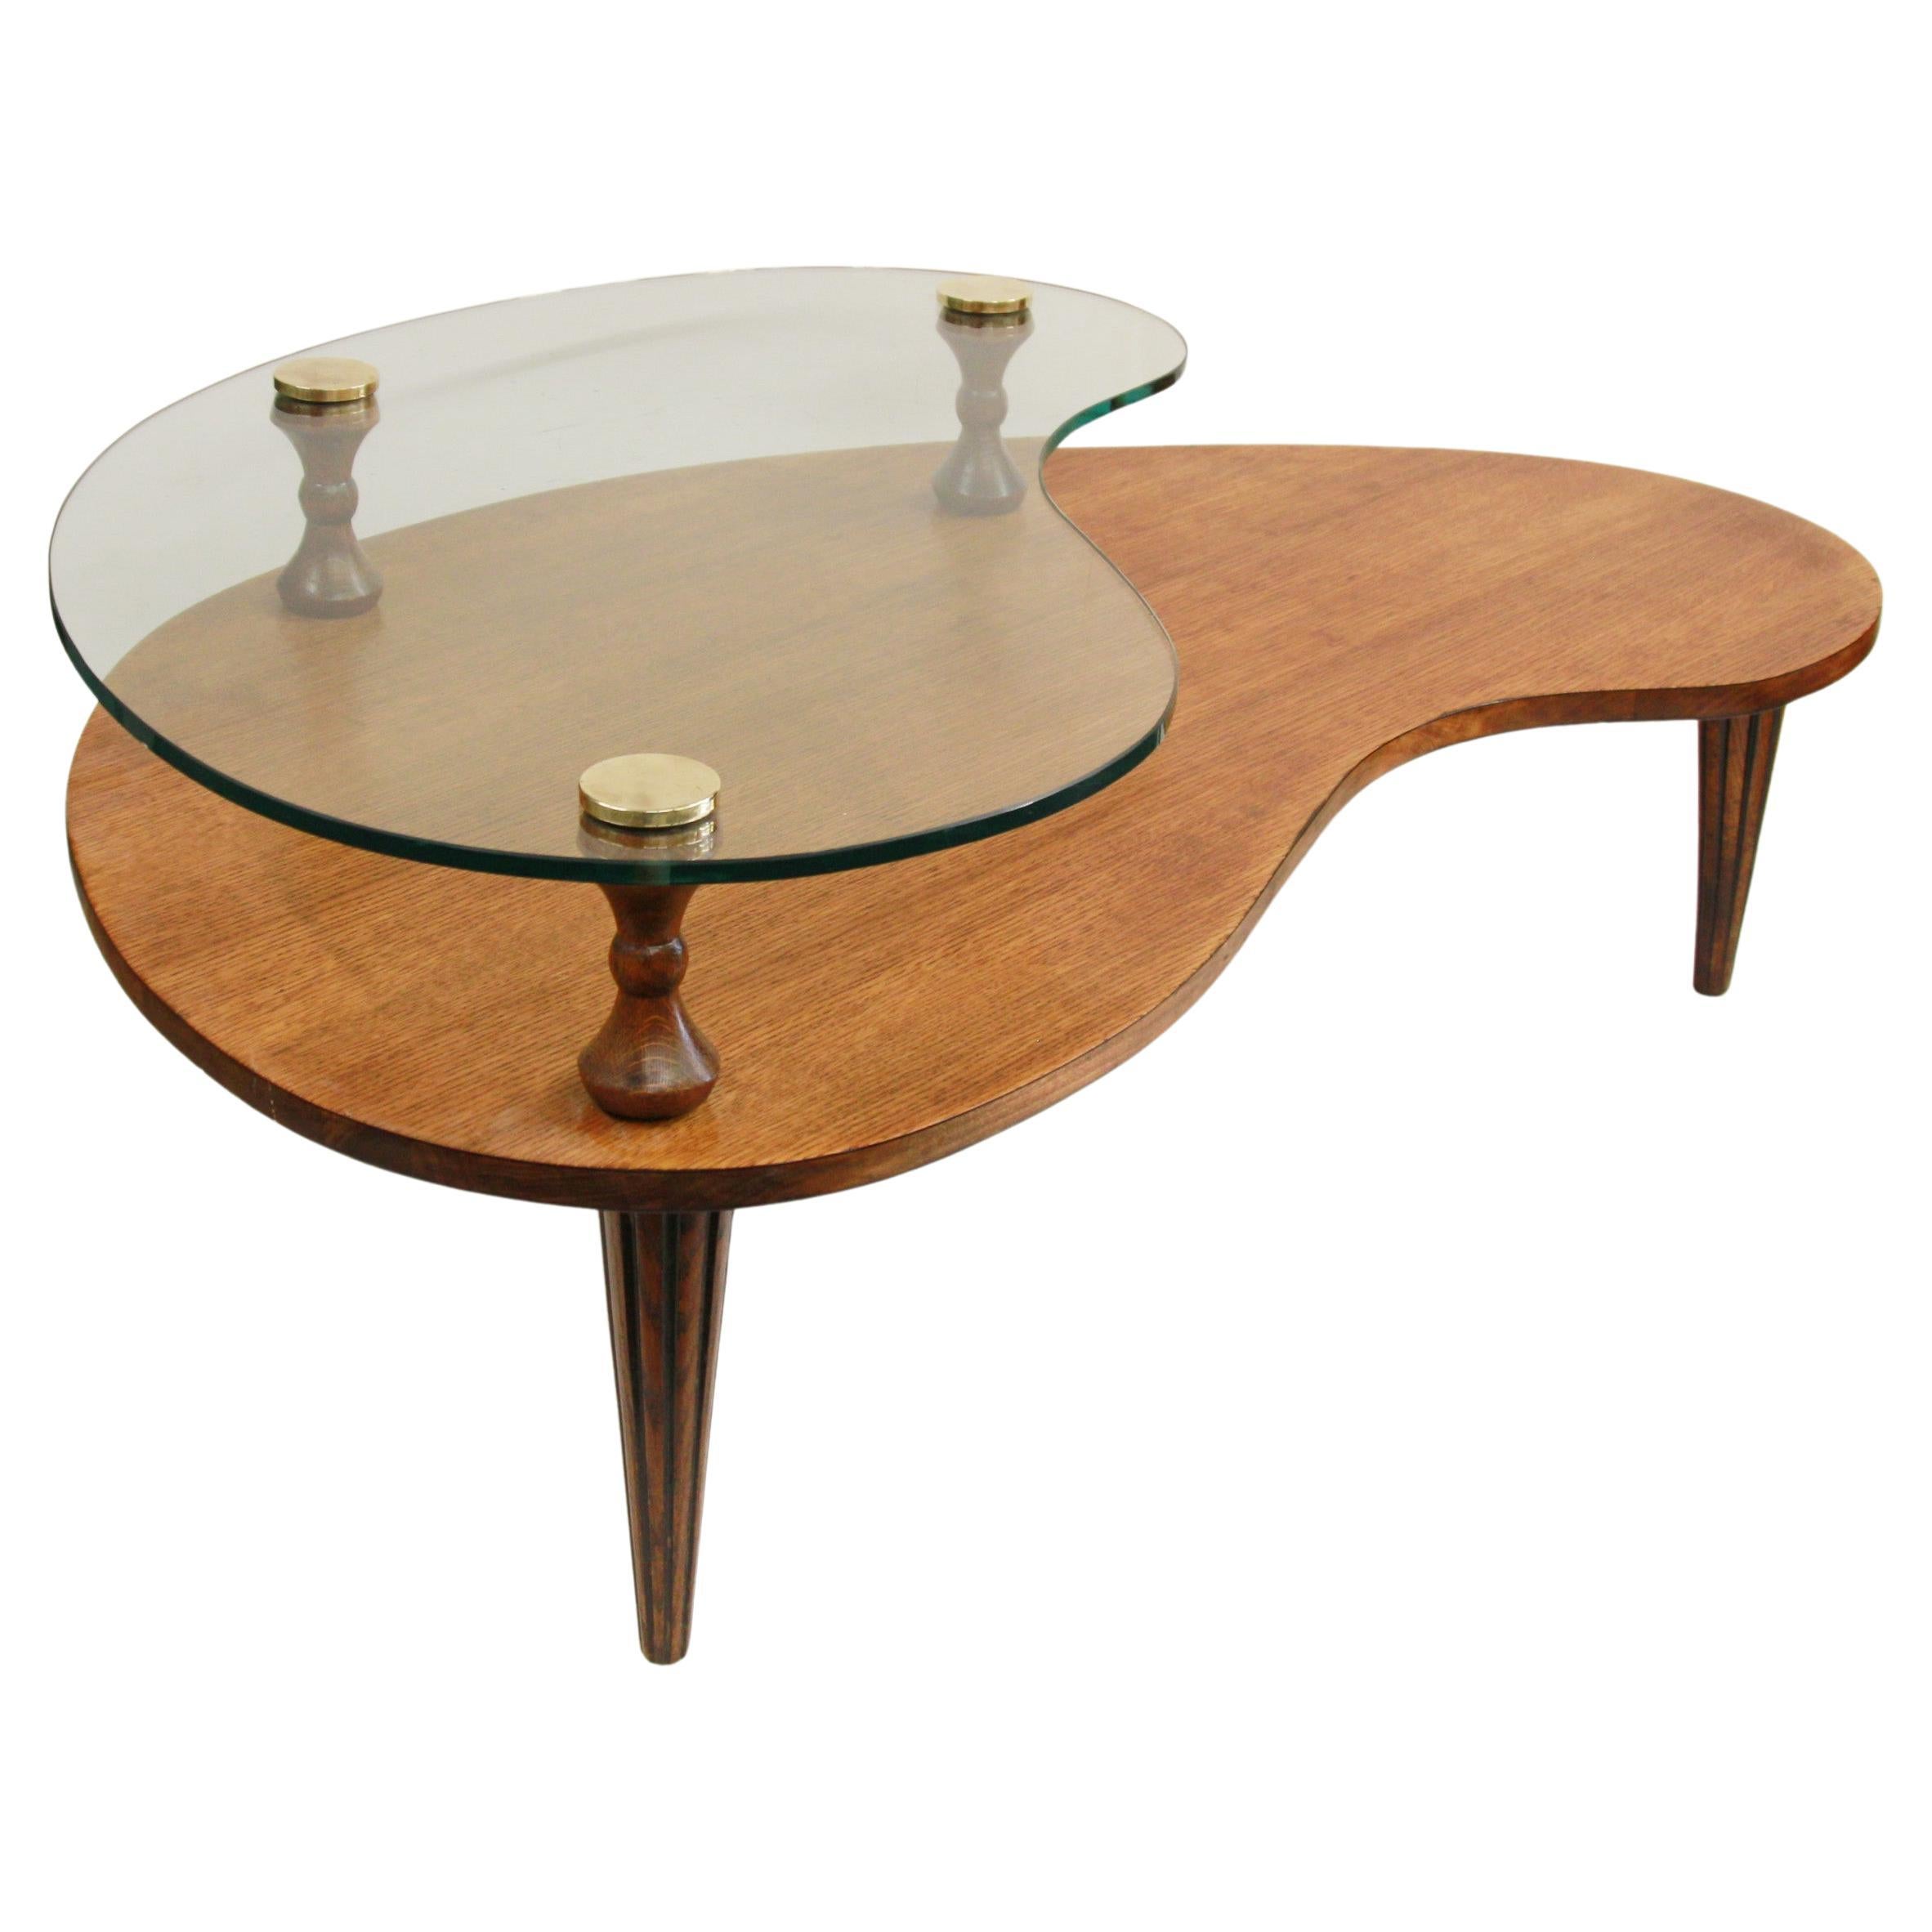 Atomic Mid Century Modern Biomorphic Kidney Shaped Glass & Oak Coffee Table For Sale